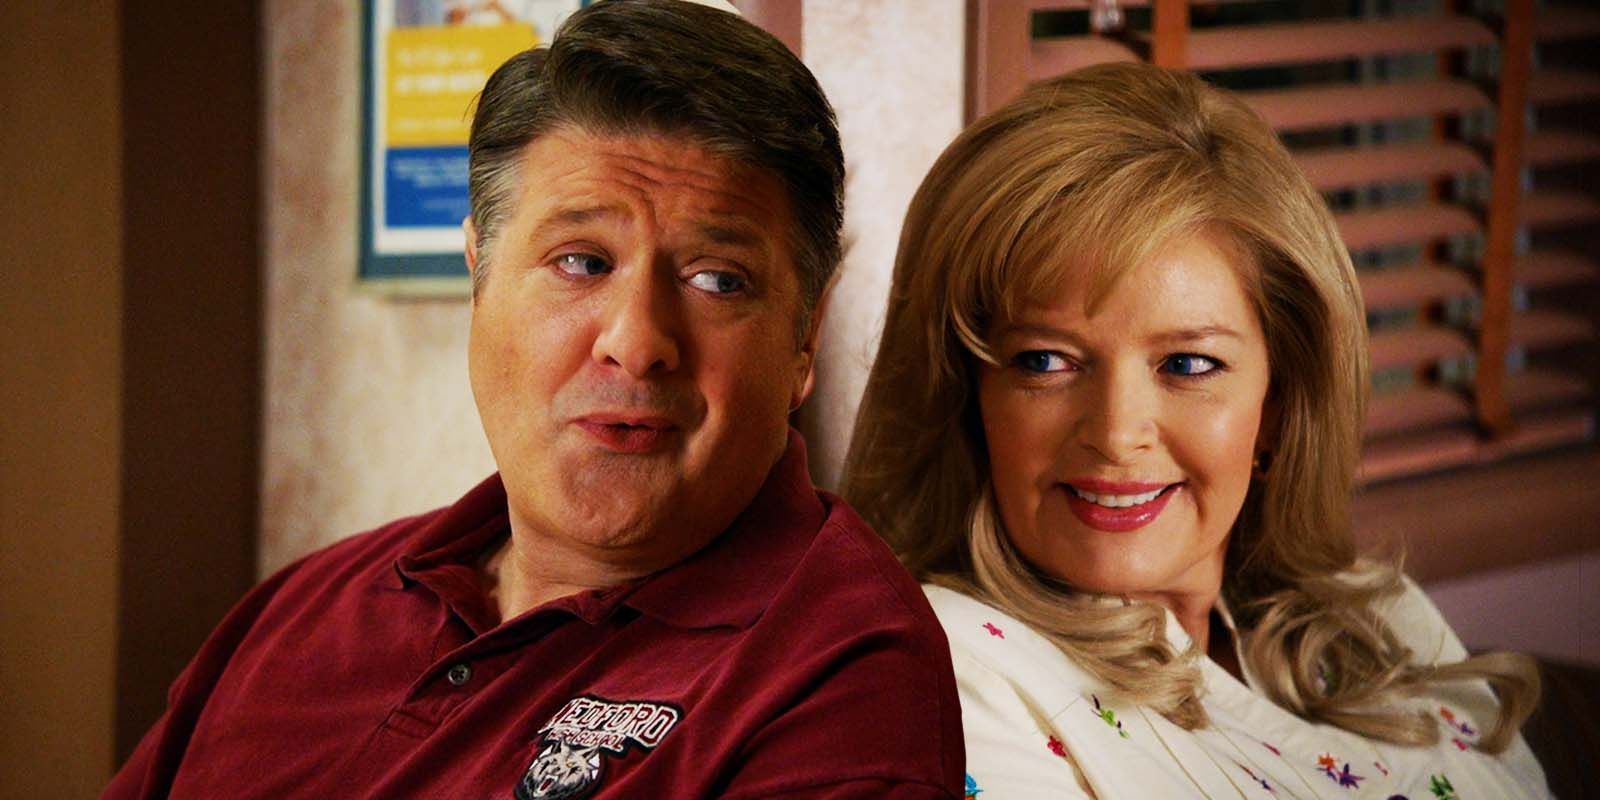 Lance Barber as George Cooper and Melissa Peterman as Brenda Sparks in Young Sheldon season 6